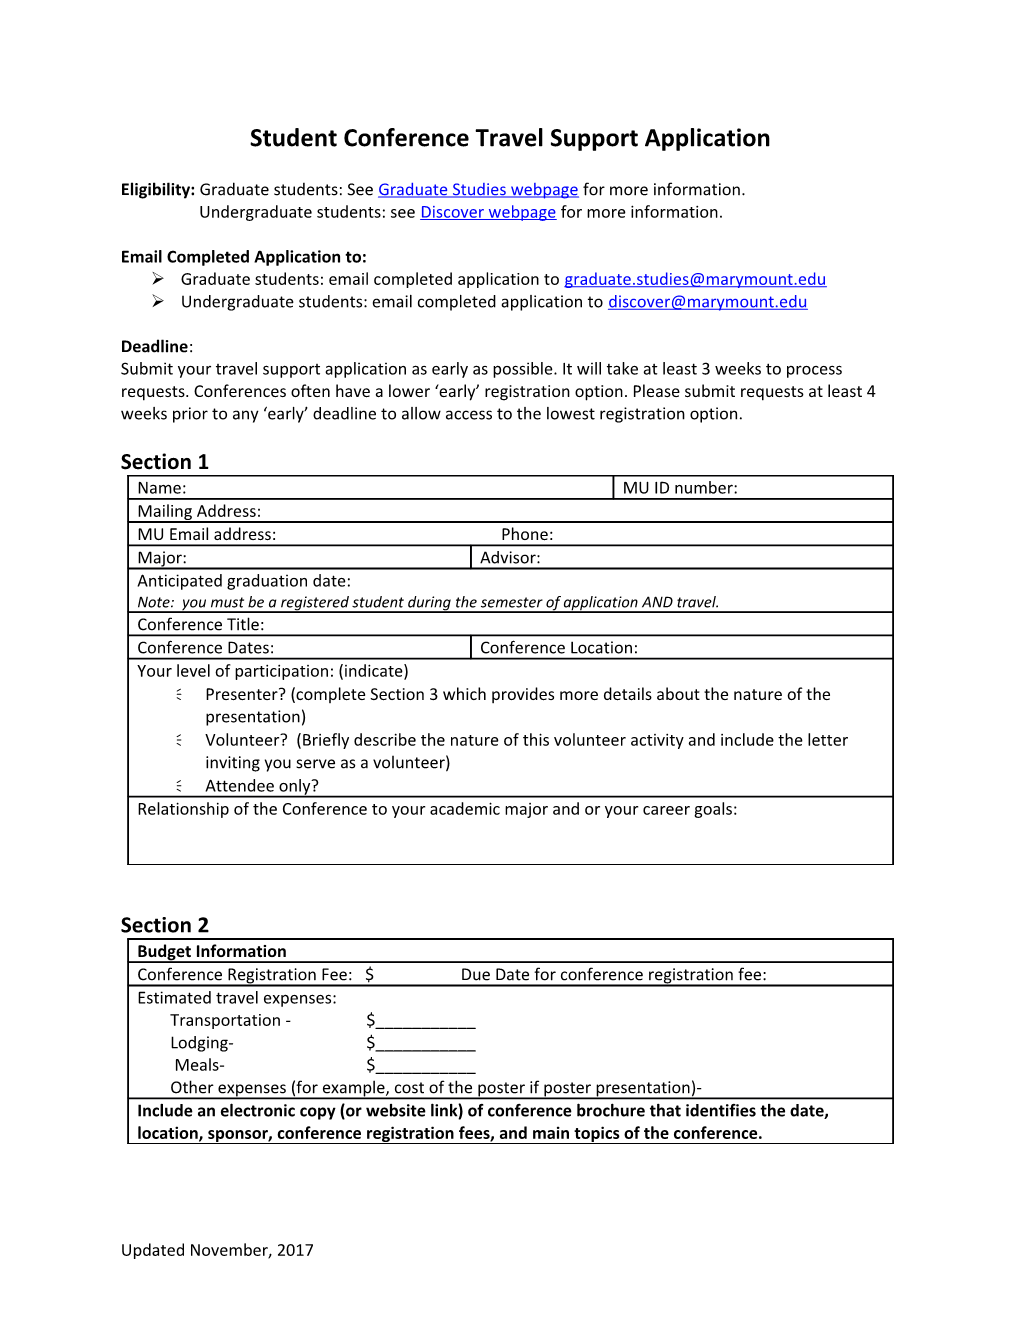 Student Conference Travel Support Application